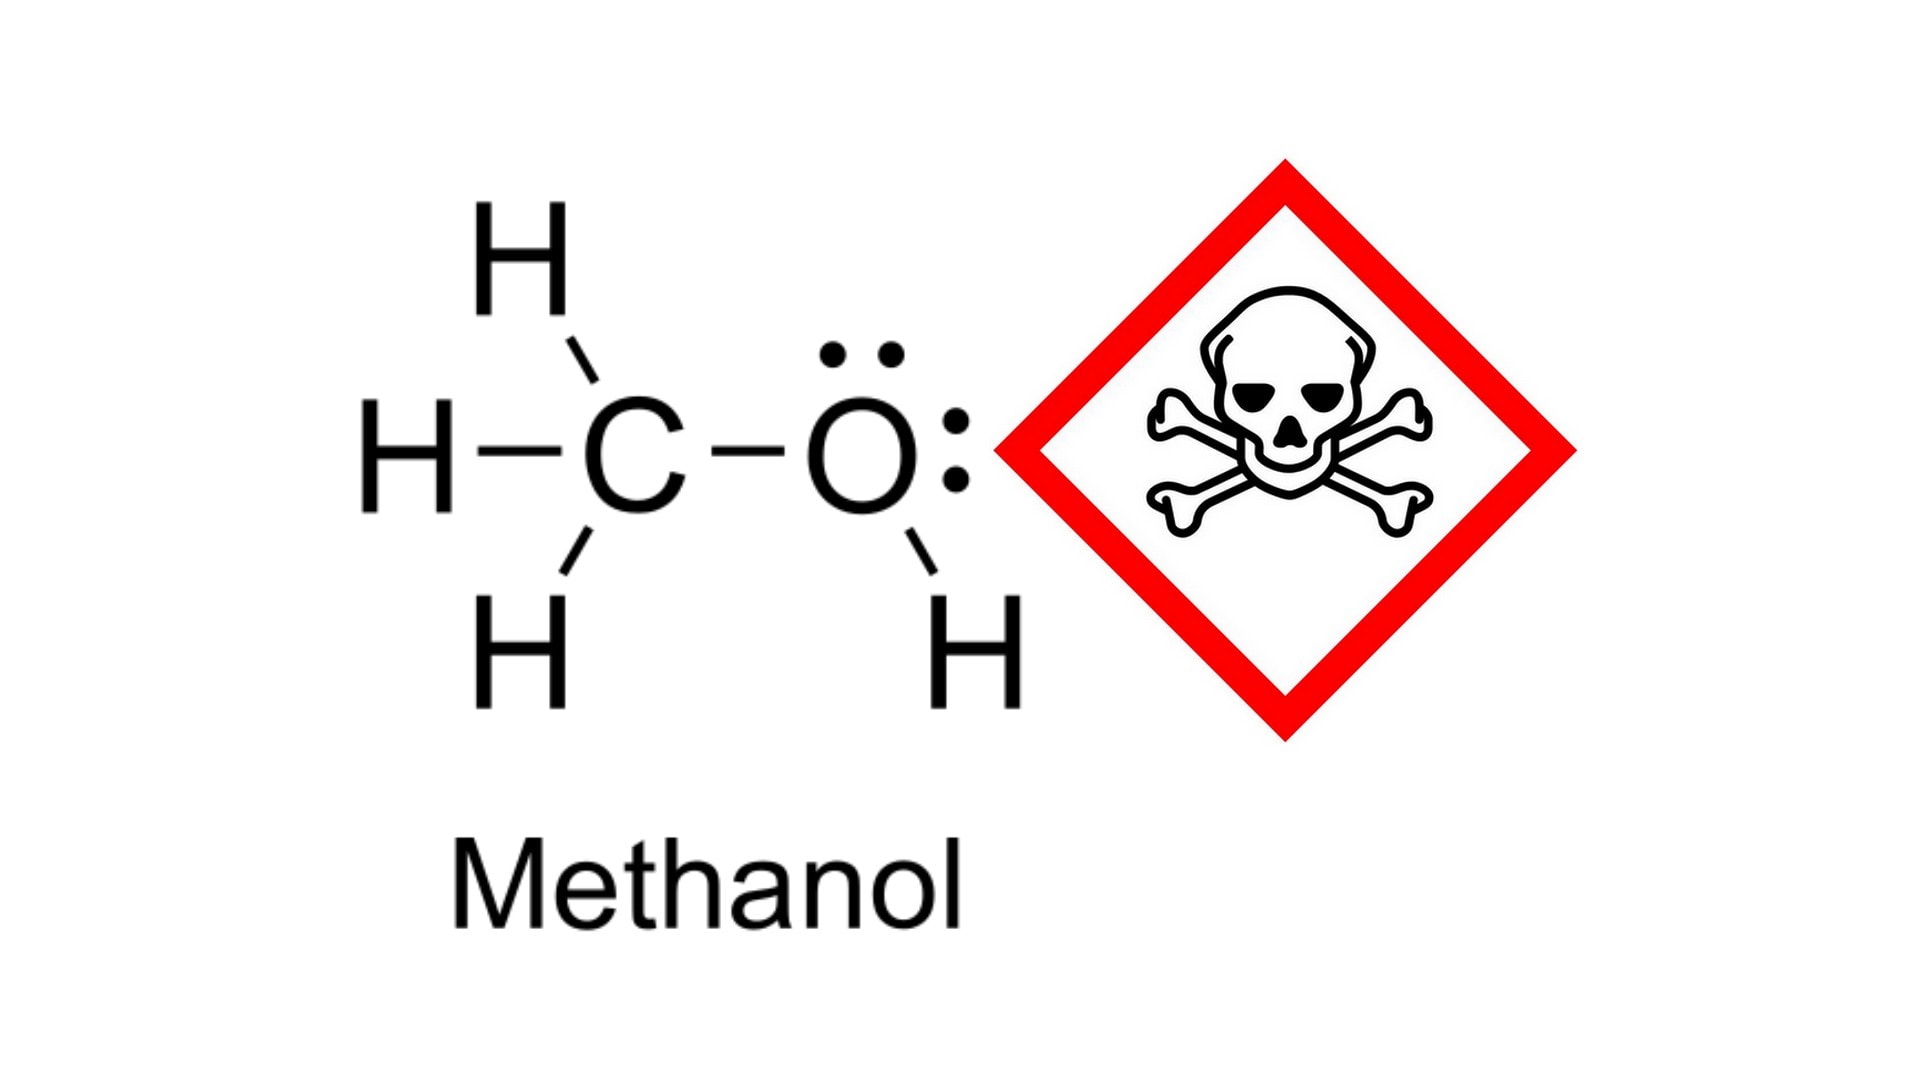 https://s1.cdn.autoevolution.com/images/news/synthetic-fuel-producers-betting-on-methanol-must-have-forgotten-it-is-toxic-221558_1.jpg